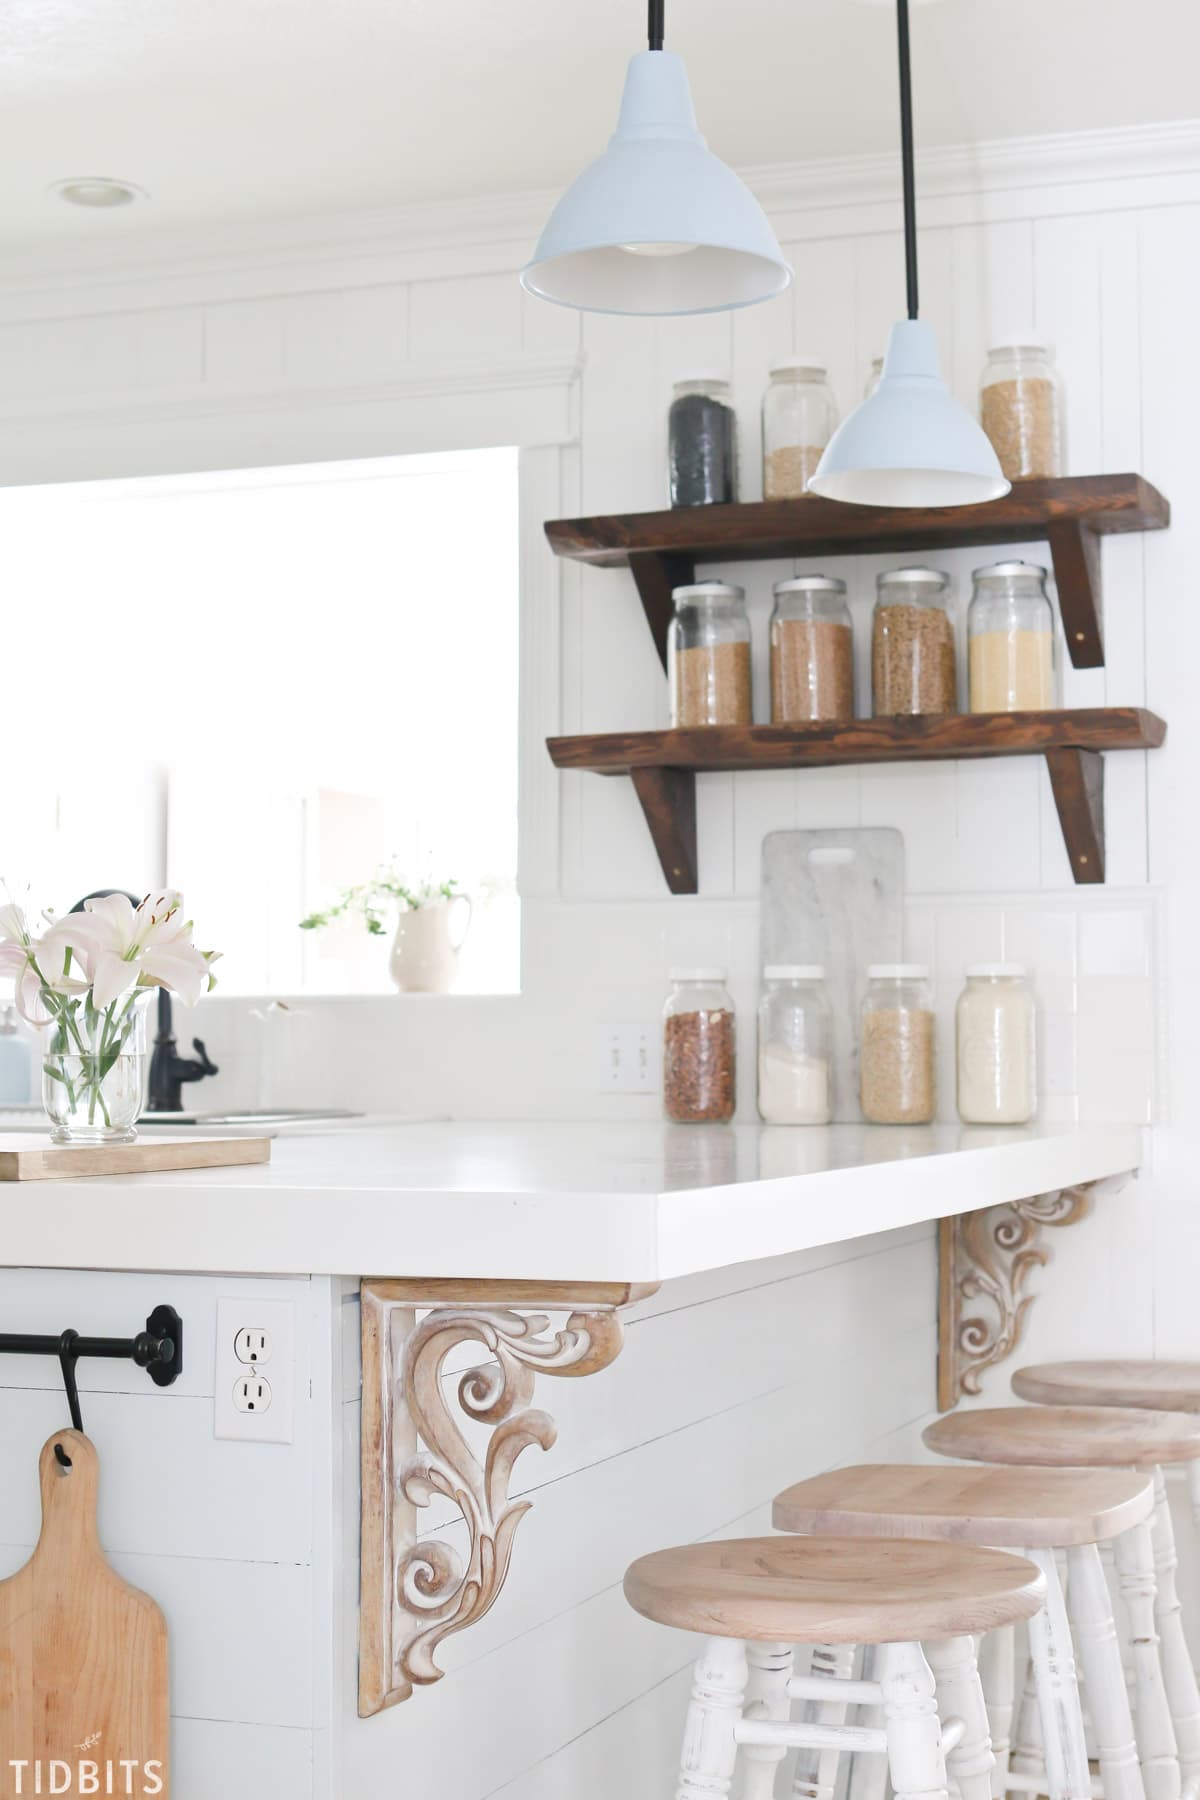 A Spring kitchen refresh. My process for cleaning and refreshing my cottage farmhouse kitchen. #camitidbits #cottagestyle #farmhousestyle #farmhousekitchen #cottagekitchen #springdecor